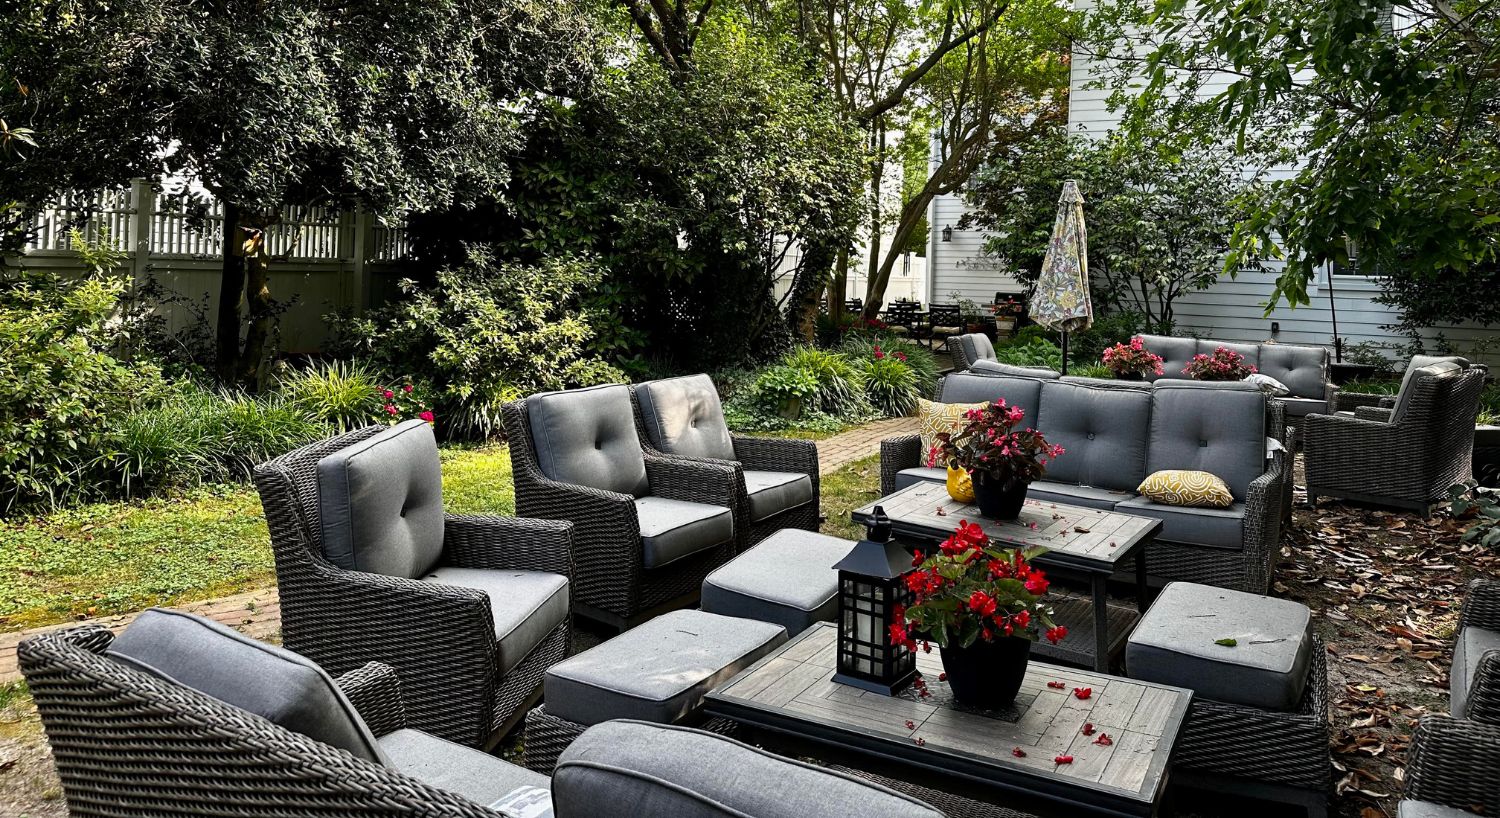 Backyard patio and garden area with multiple patio couches and chairs surrounded by lush plants and trees